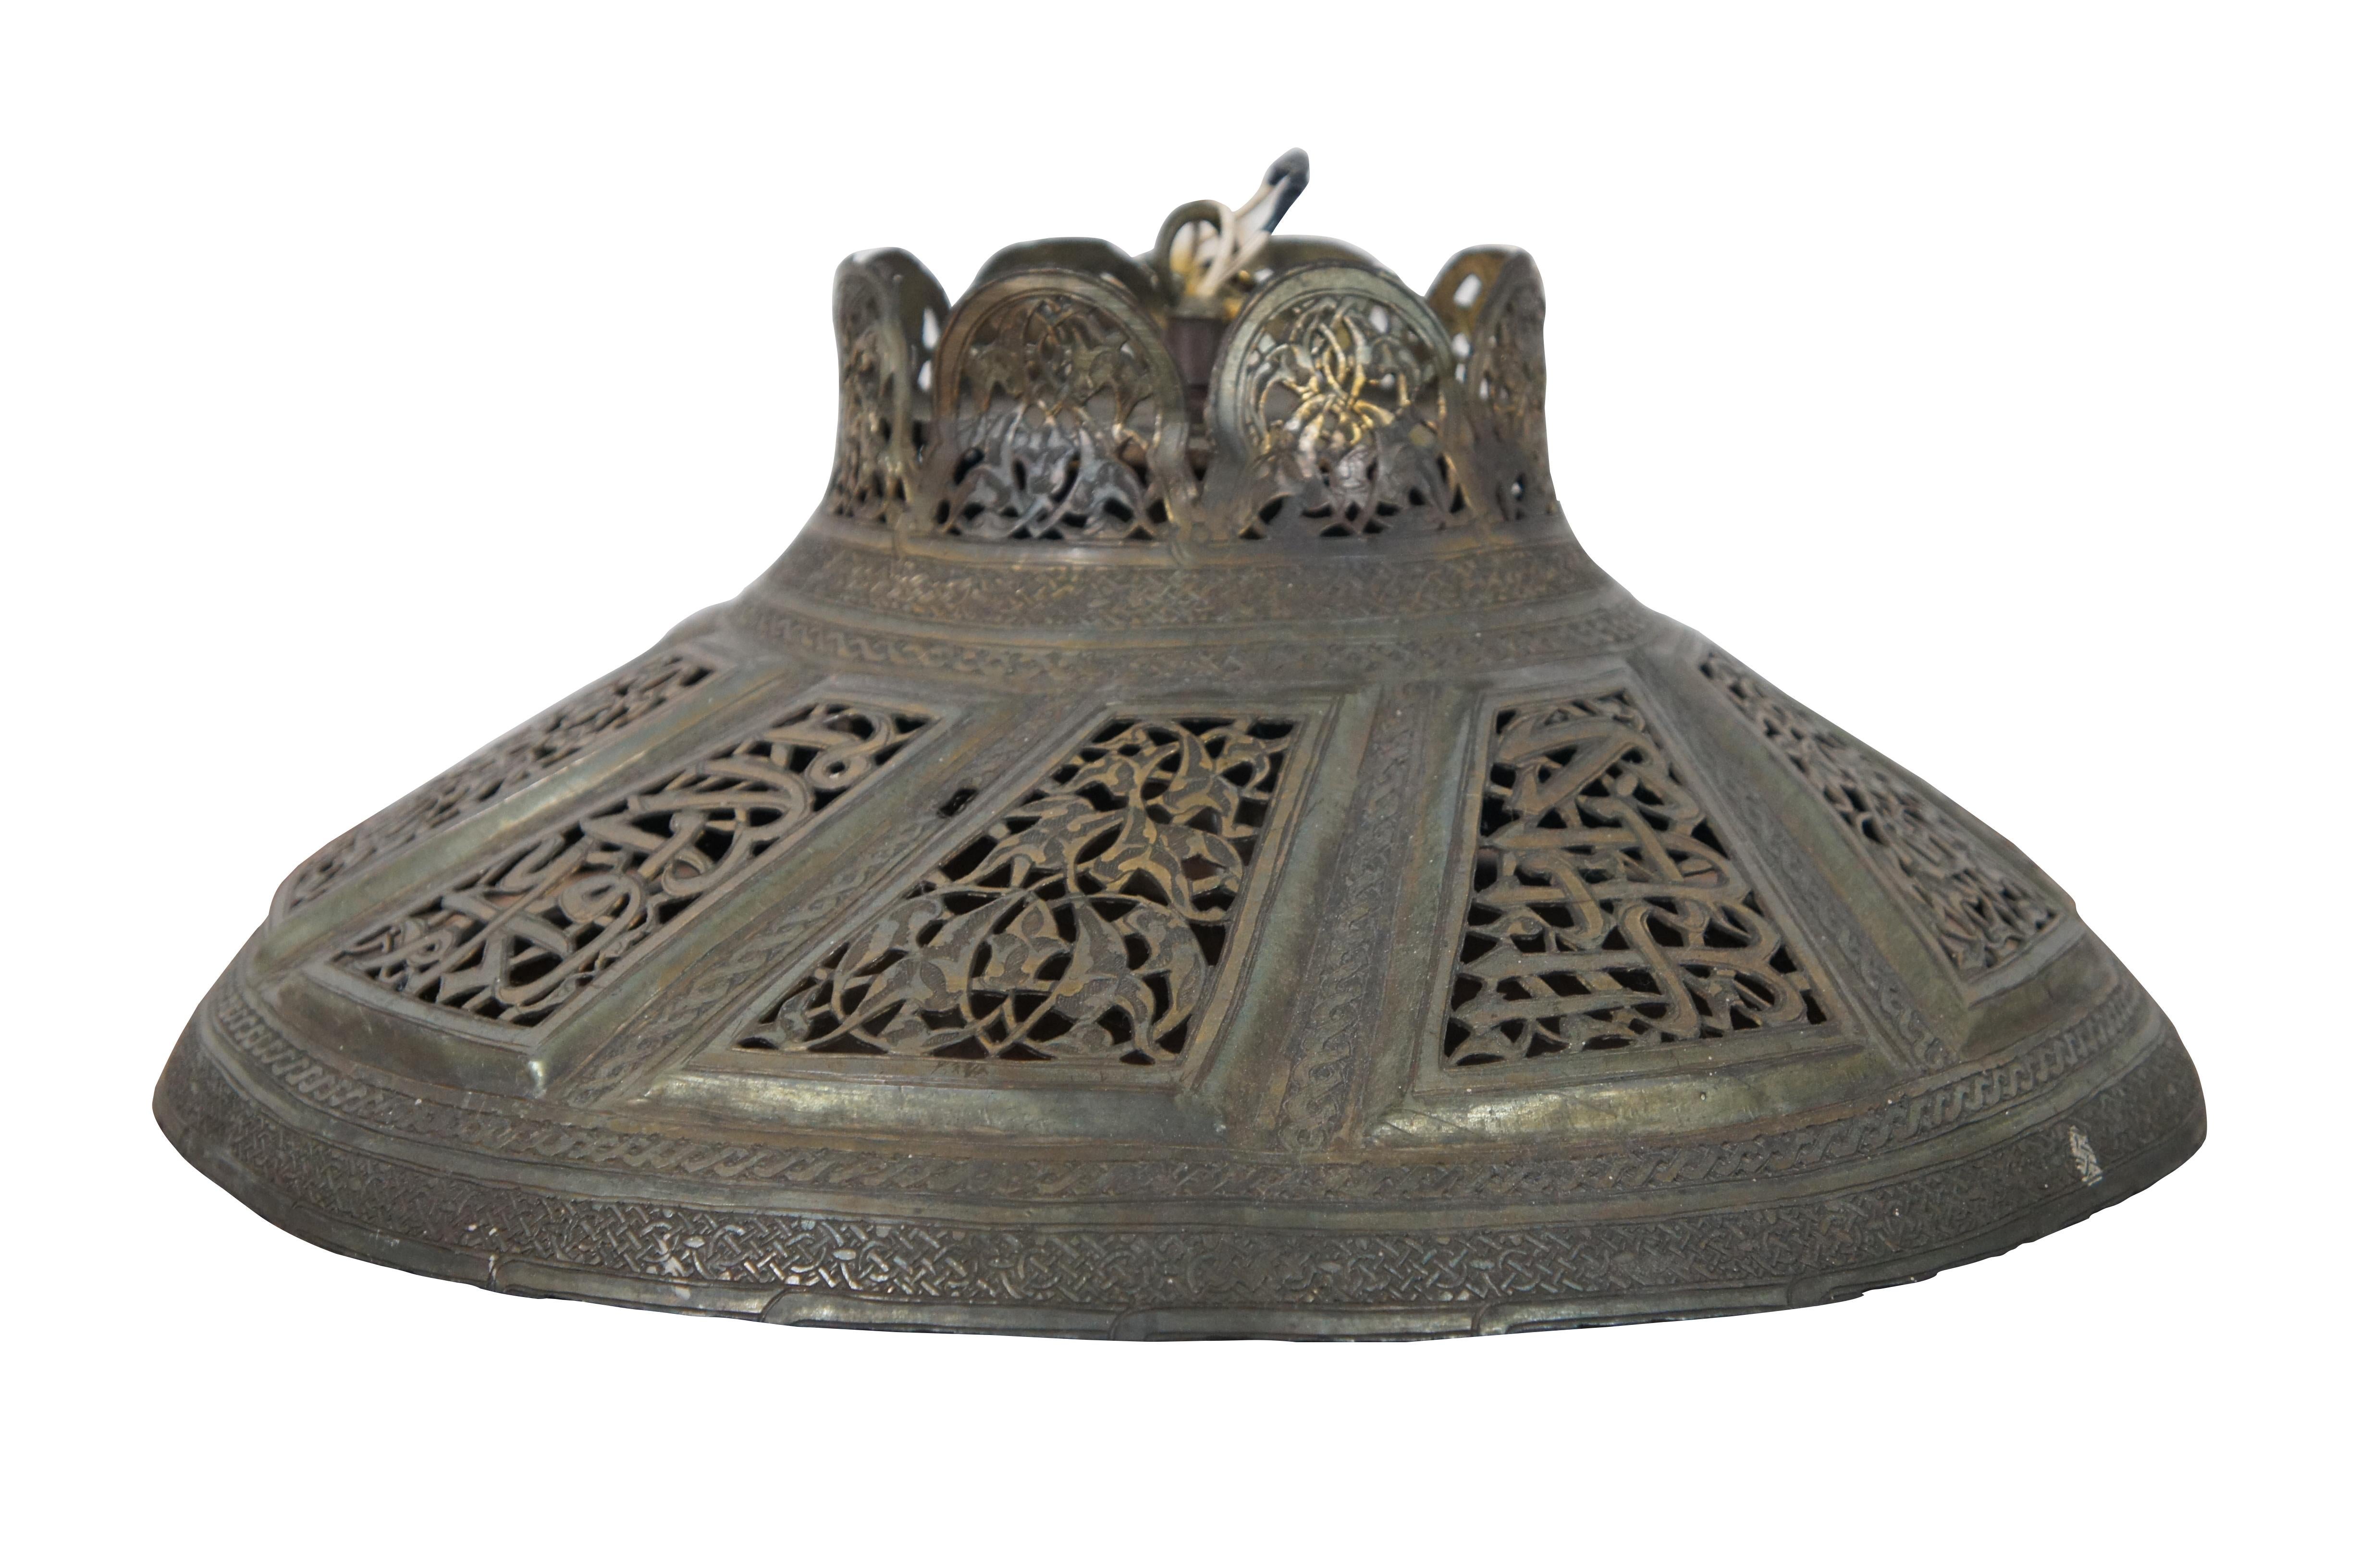 Vintage pierced brass chandelier / pendant / ceiling / swag light or shade, featuring Turkish or Moroccan styling with pierced panels and scalloped top with a floral / foliate design, edged in Celtic style knot work.

Measures: 16.5” x 7” / chain